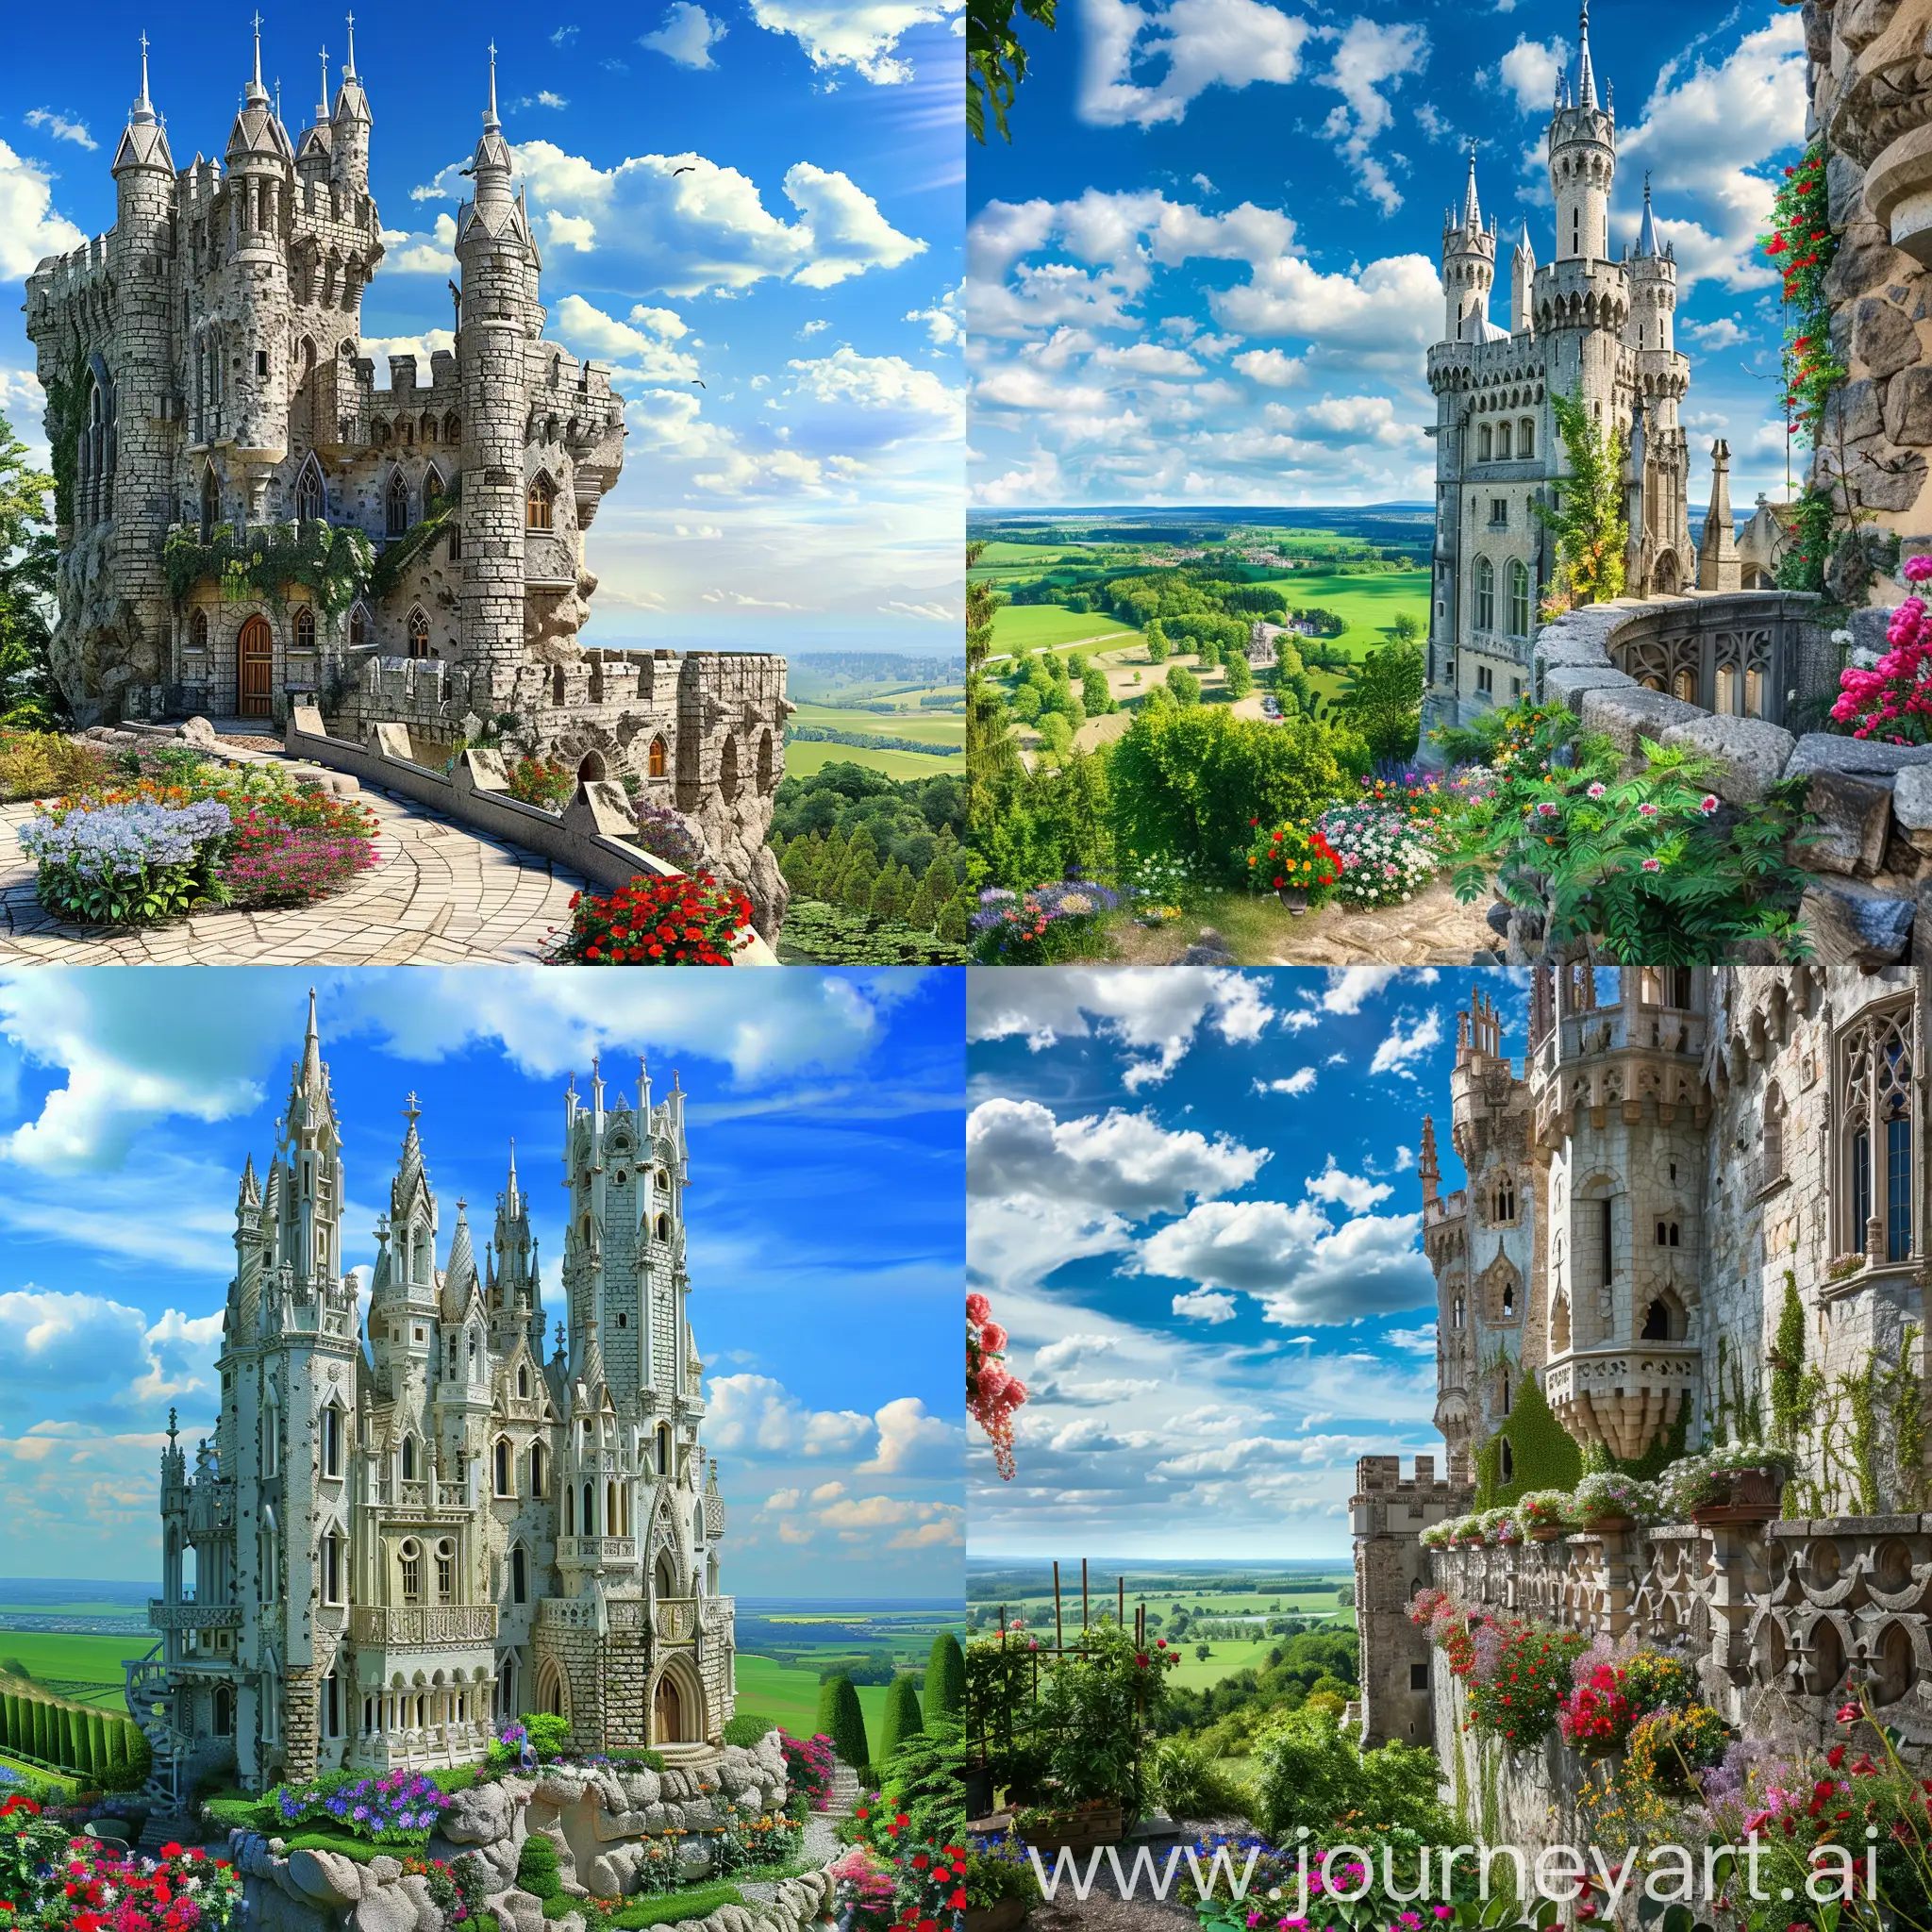 Gothic-Castle-Surrounded-by-Lush-Garden-and-Blue-Sky